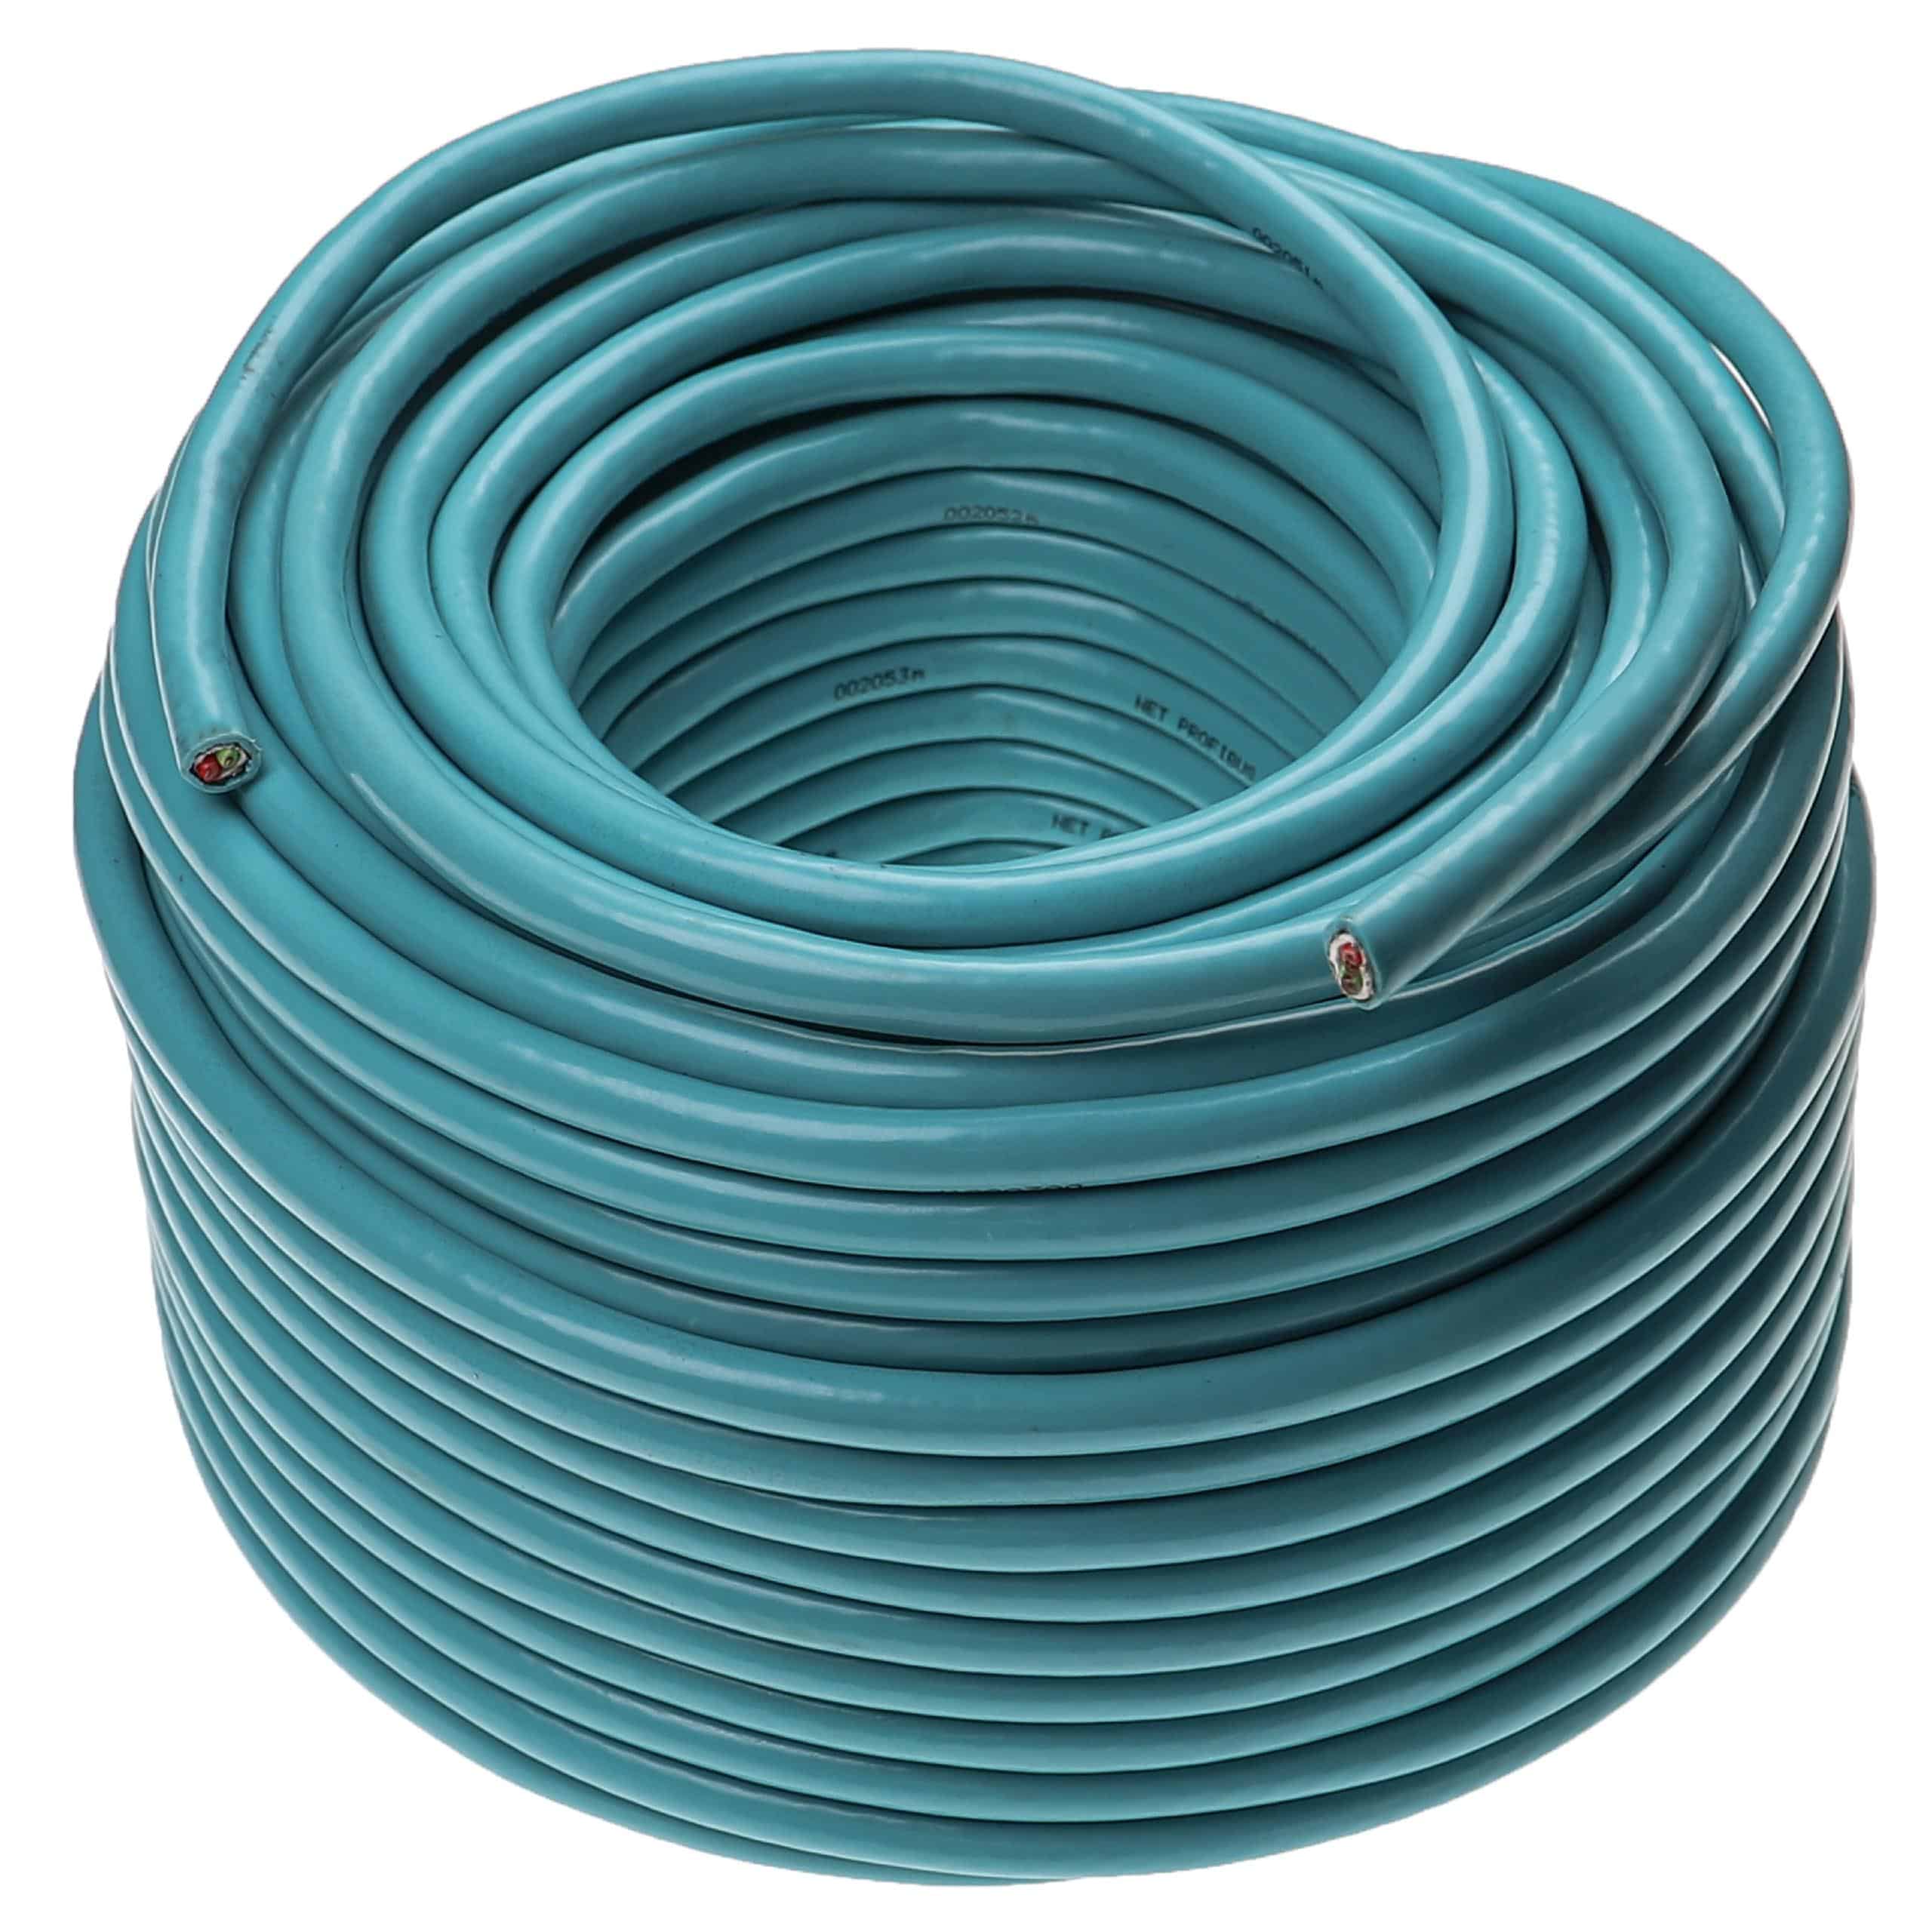 vhbw Installation Cable for System Network - Network Cable Blue, 50 m